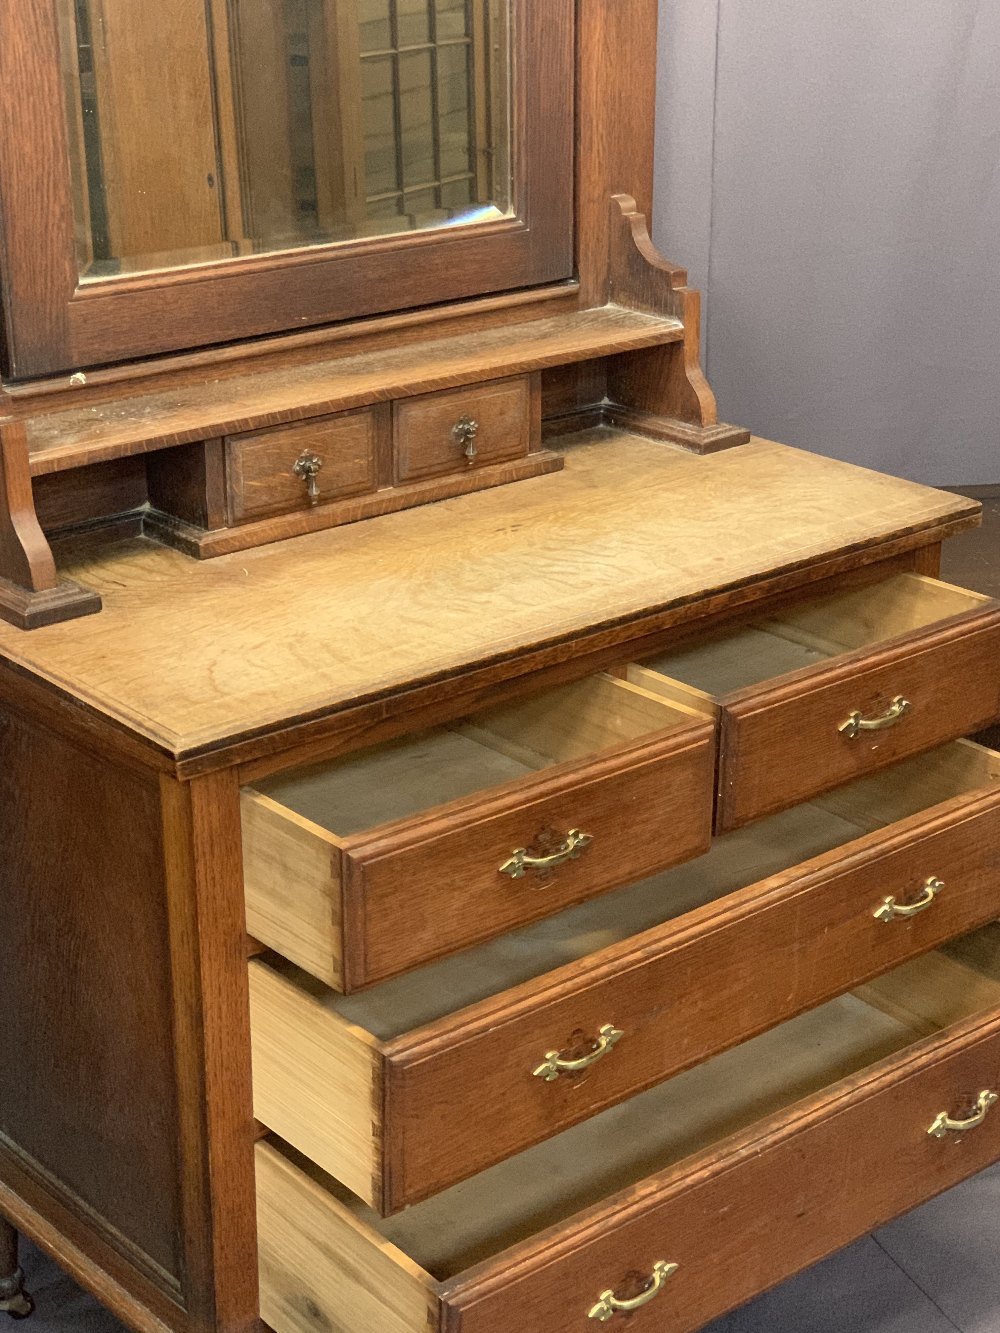 VINTAGE OAK MIRRORED DRESSING CHEST & NON-MATCHING LIDDED BLANKET BOX - the chest with carved detail - Image 2 of 4